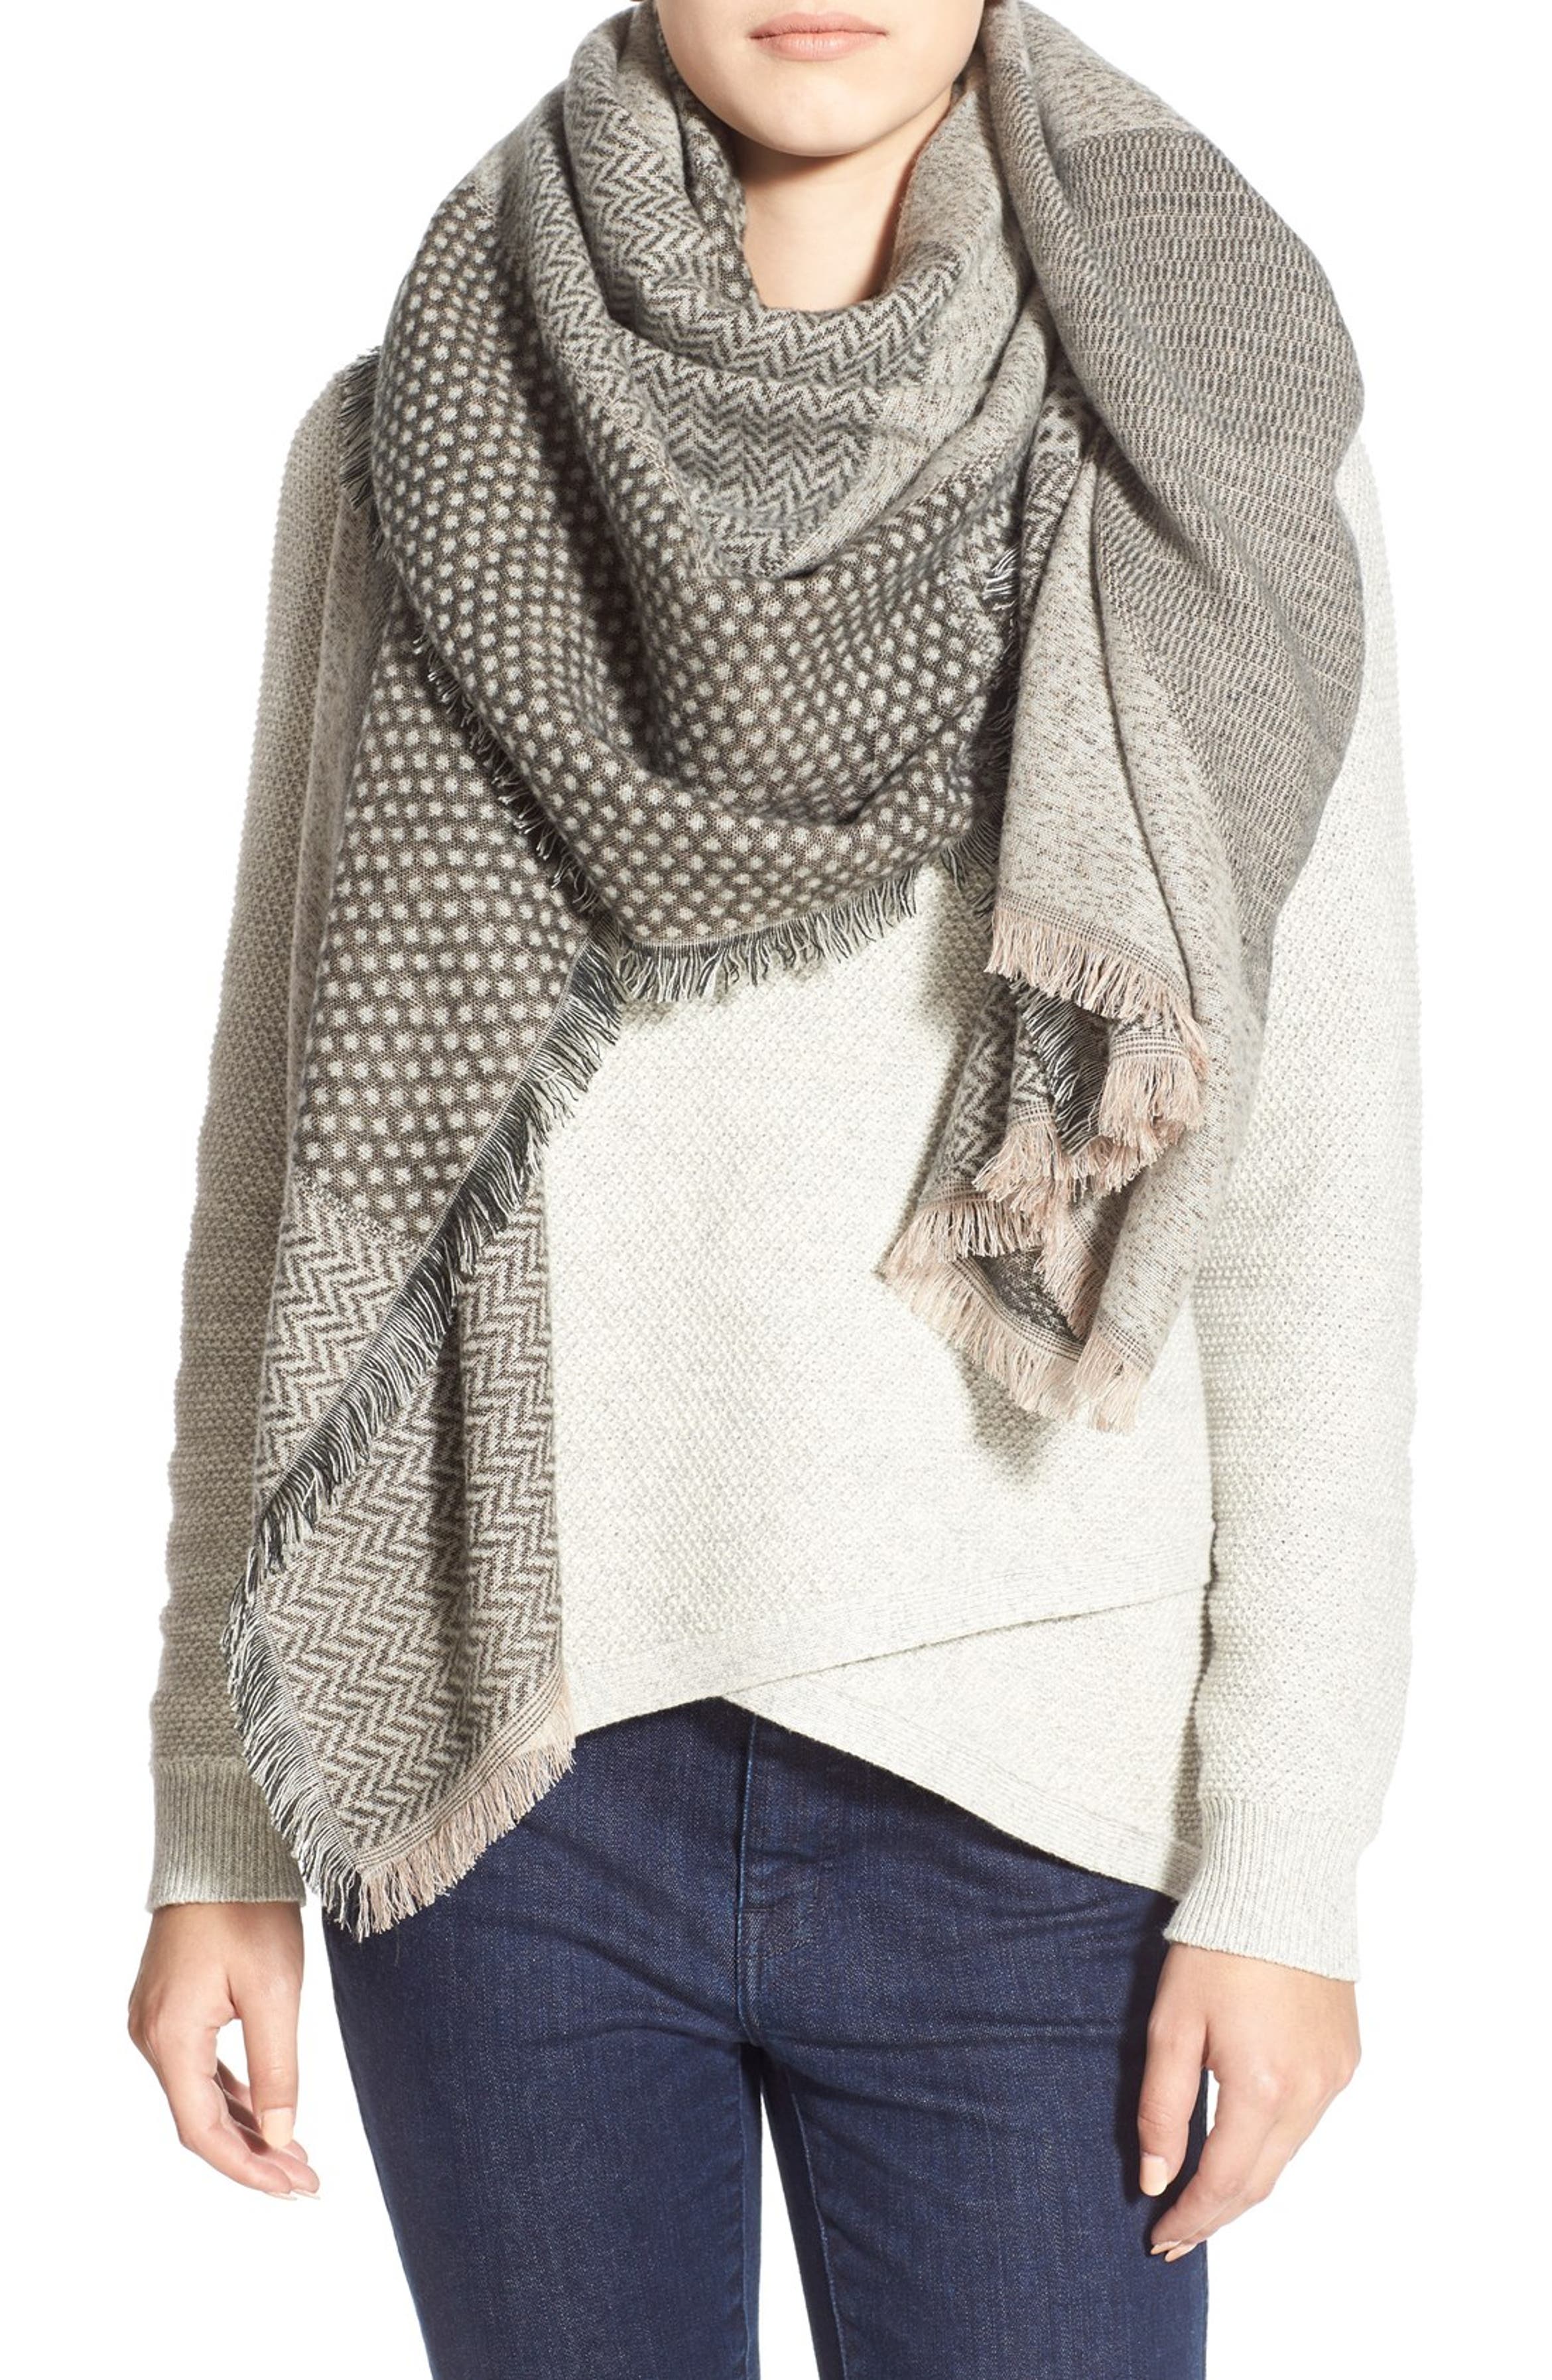 Madewell 'Origami' Scarf | Nordstrom